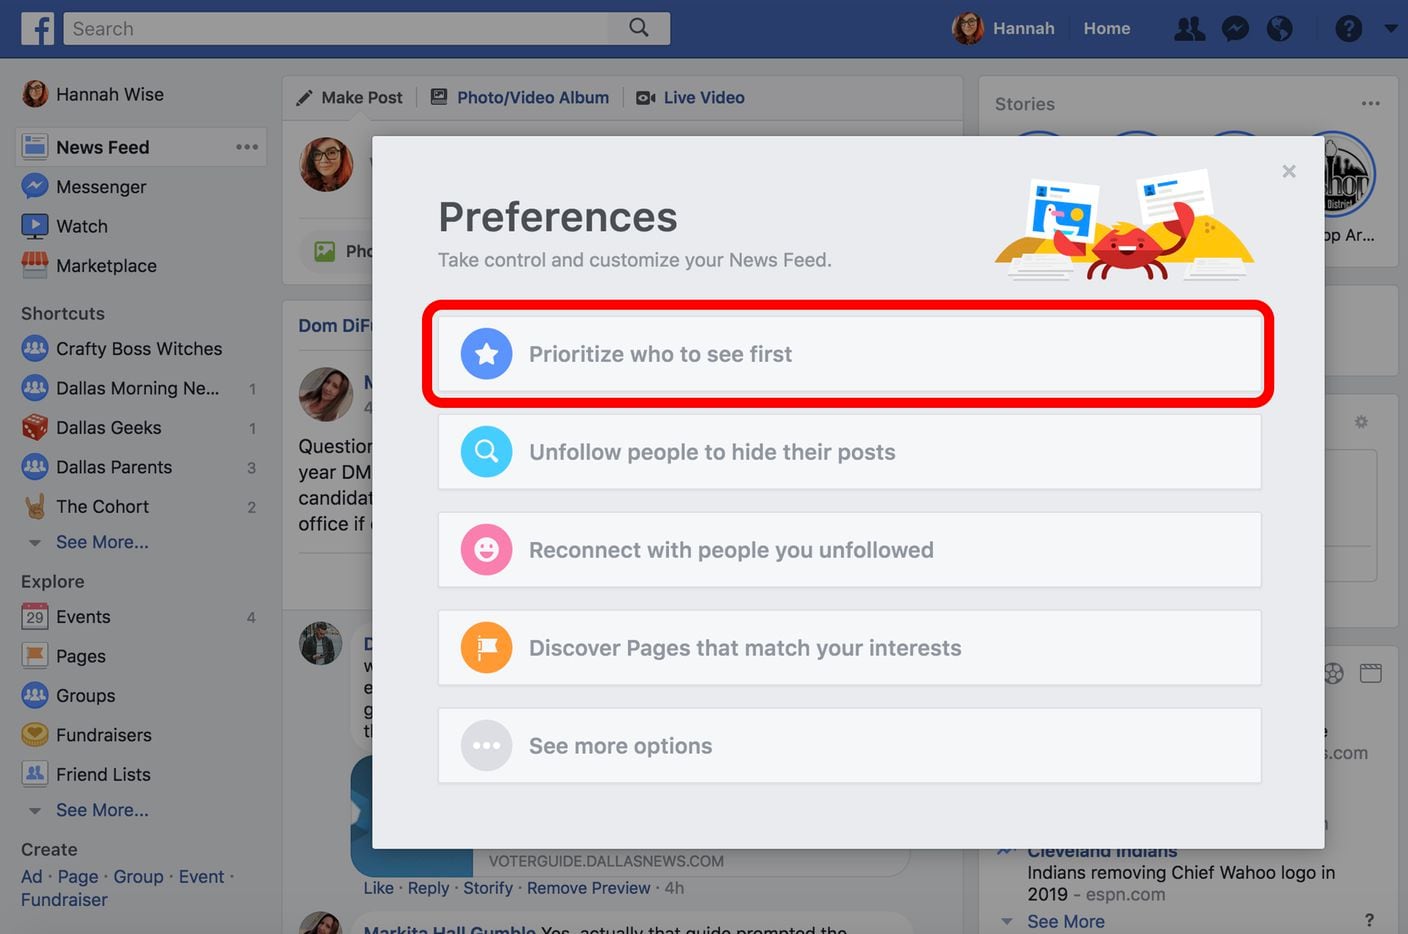 Selected 'Prioritize who to see first.' You will see a list of pages and profiles you "like"...